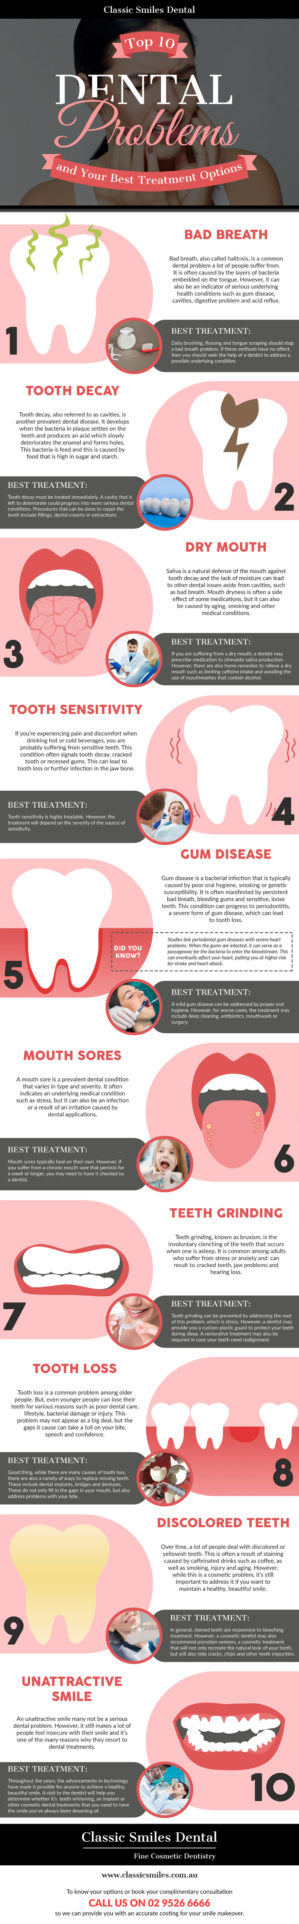 Top 10 Dental Problems and Your Best Treatment Options